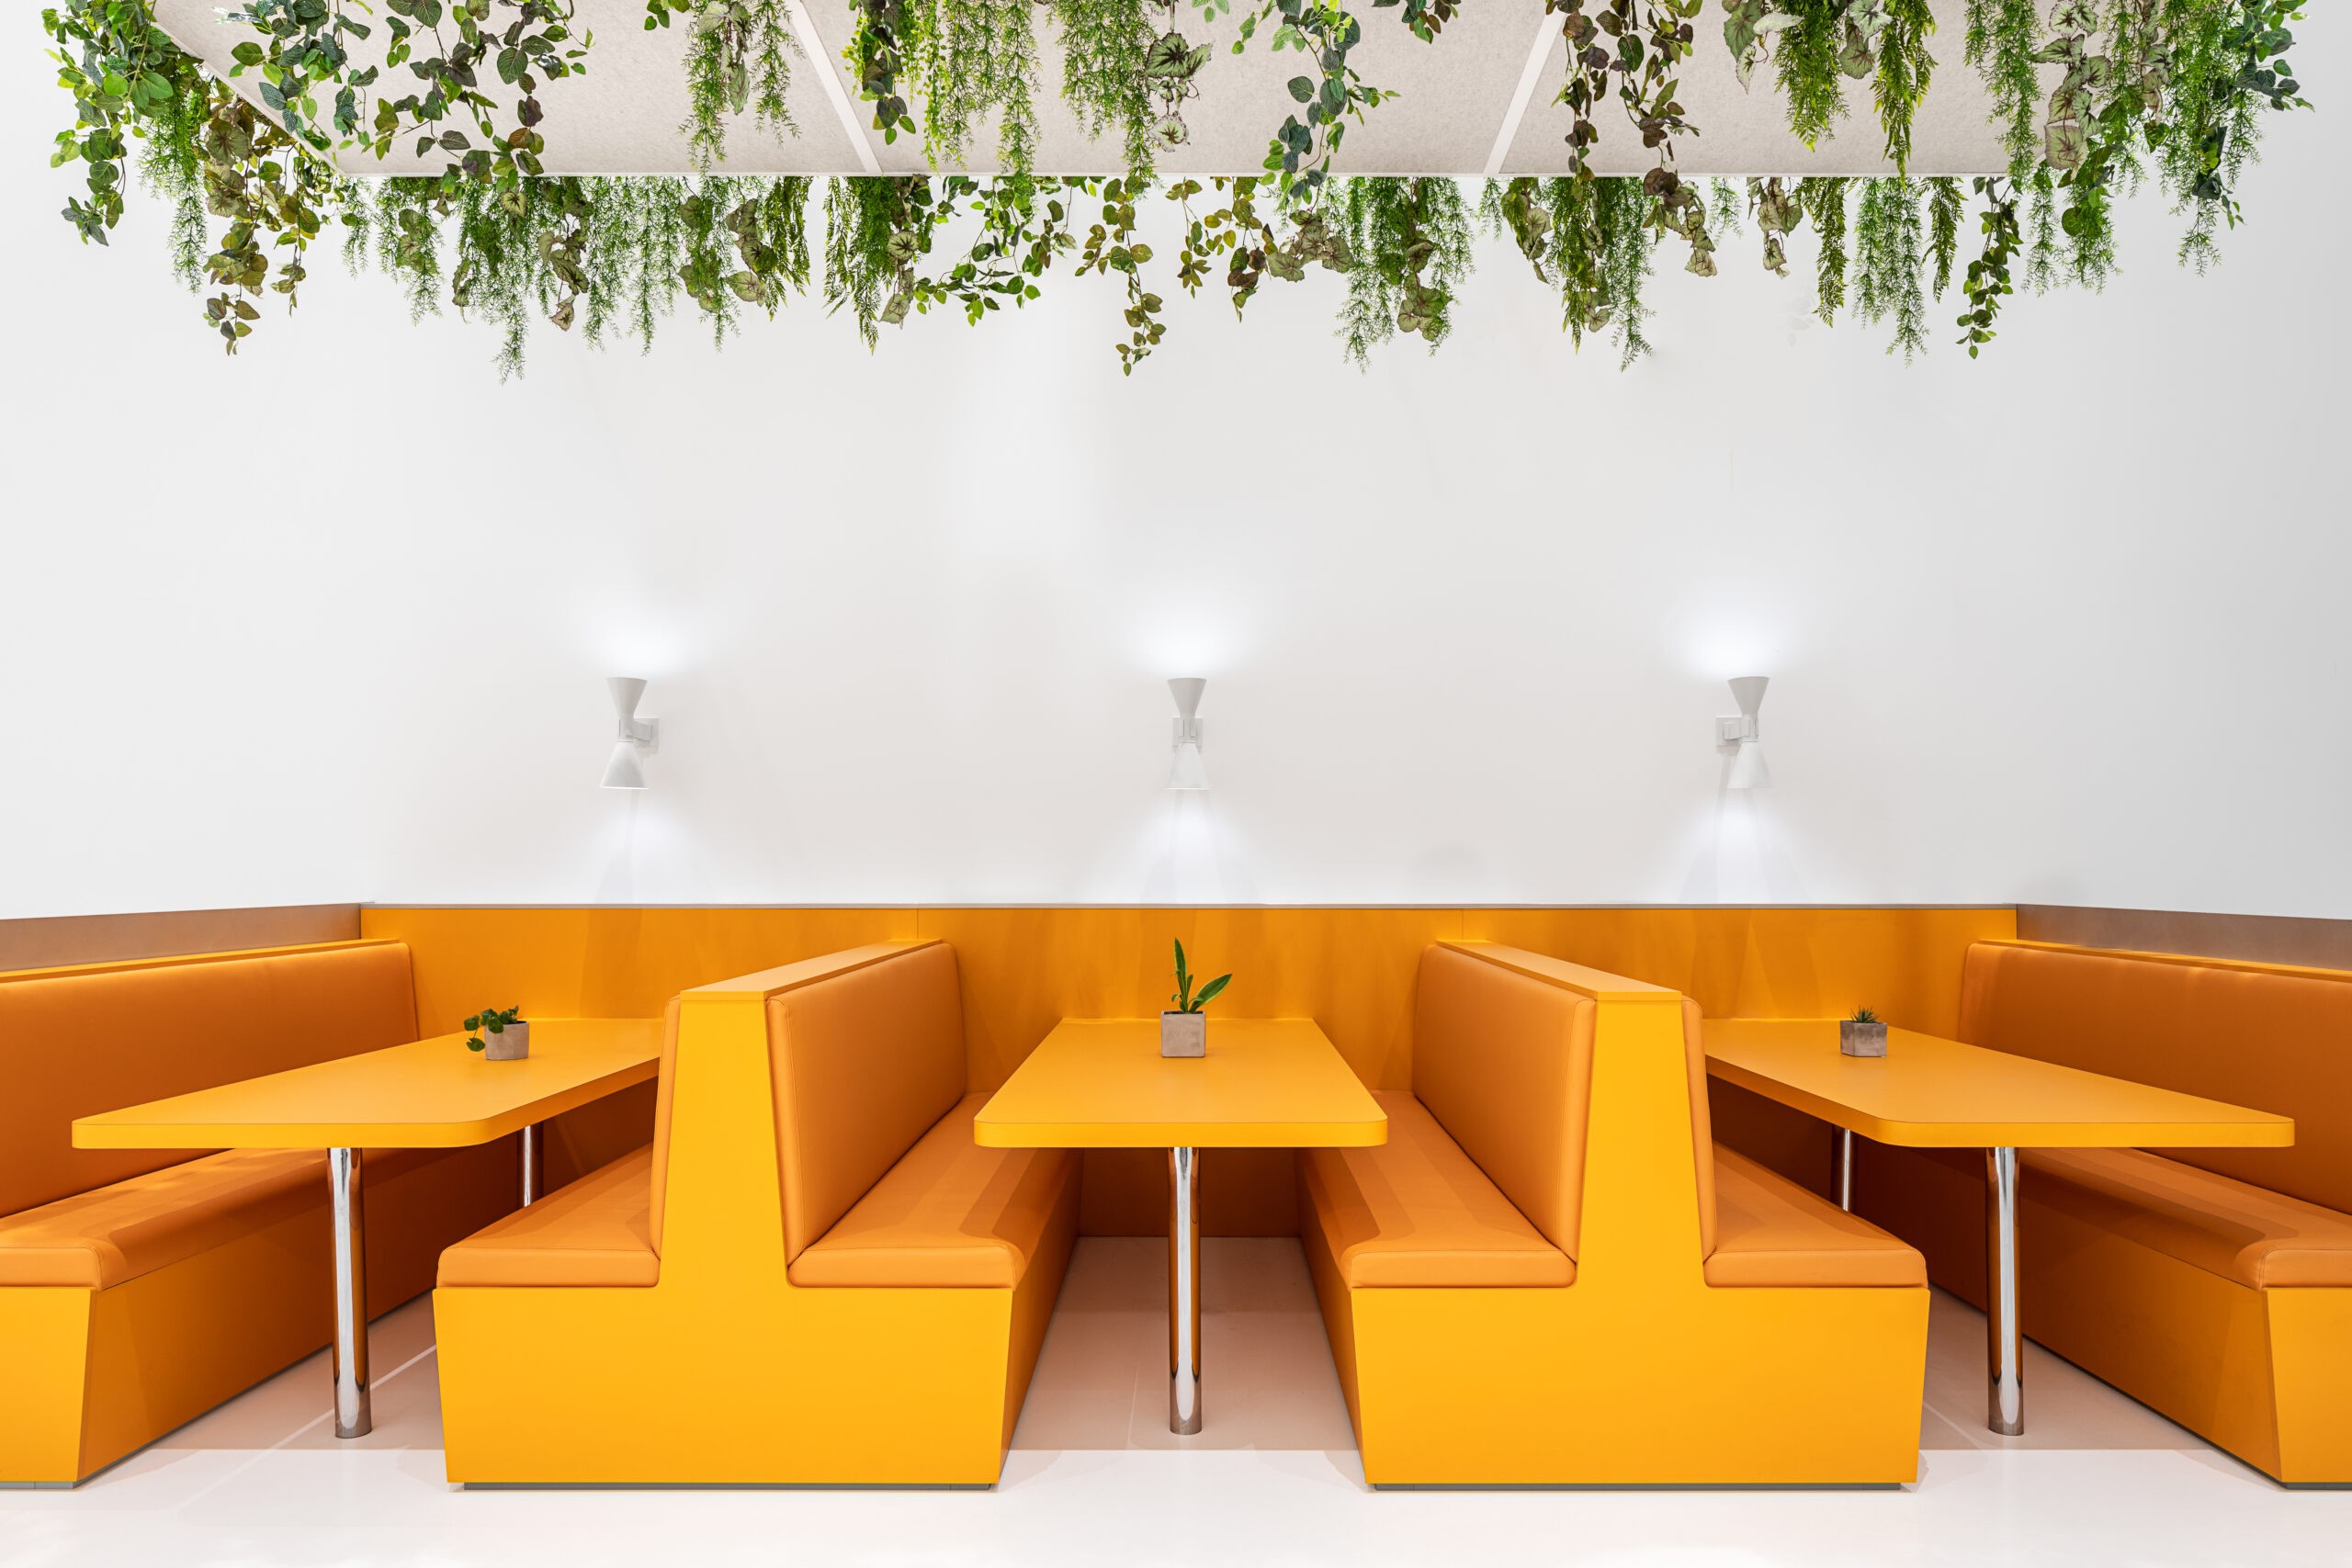 Corporate cafeteria design at Keirton headquarters in Surrey BC, with bright orange seating, white walls, and overhanging plants